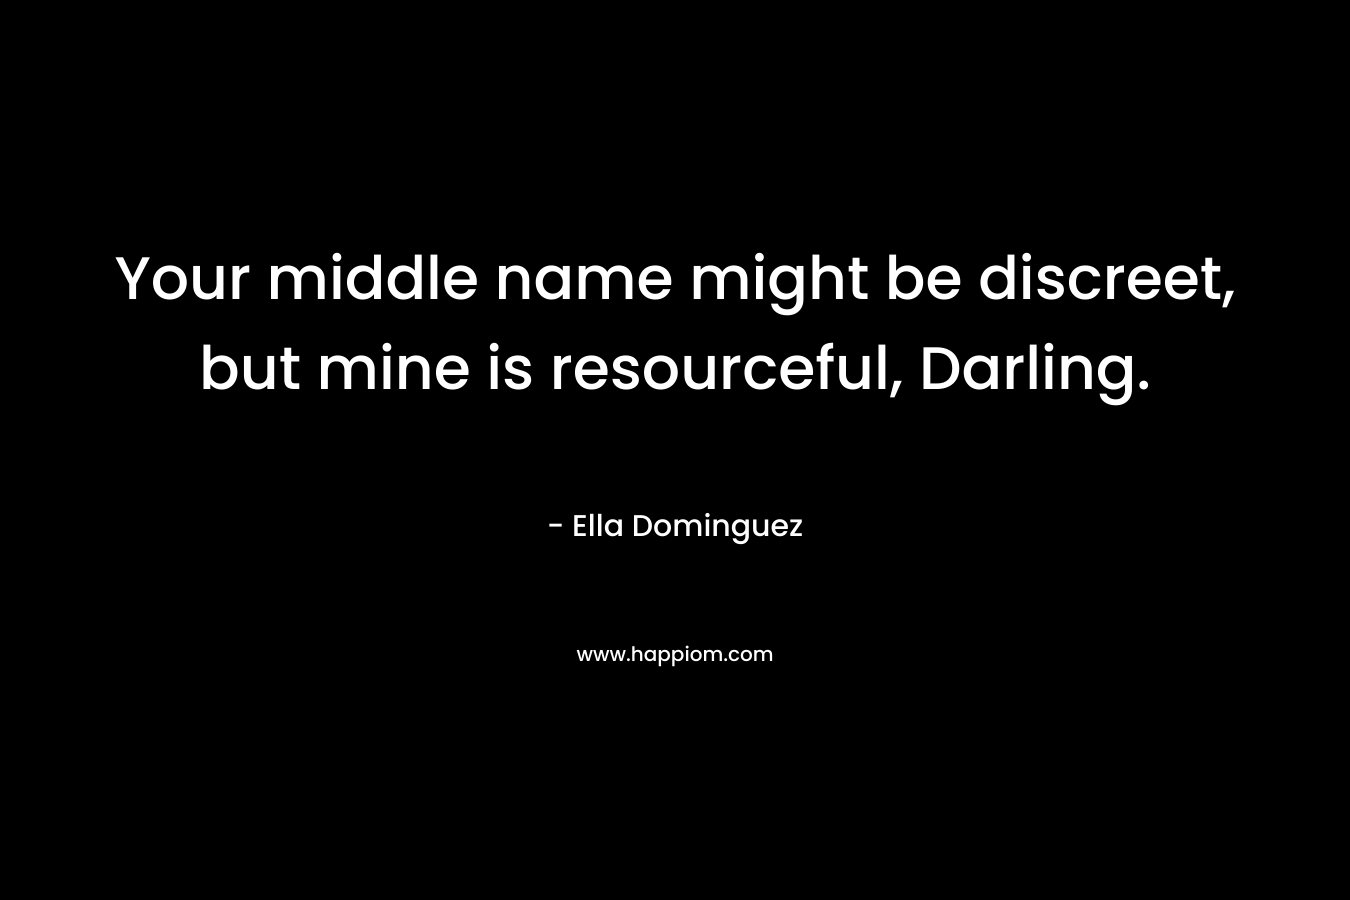 Your middle name might be discreet, but mine is resourceful, Darling. – Ella Dominguez